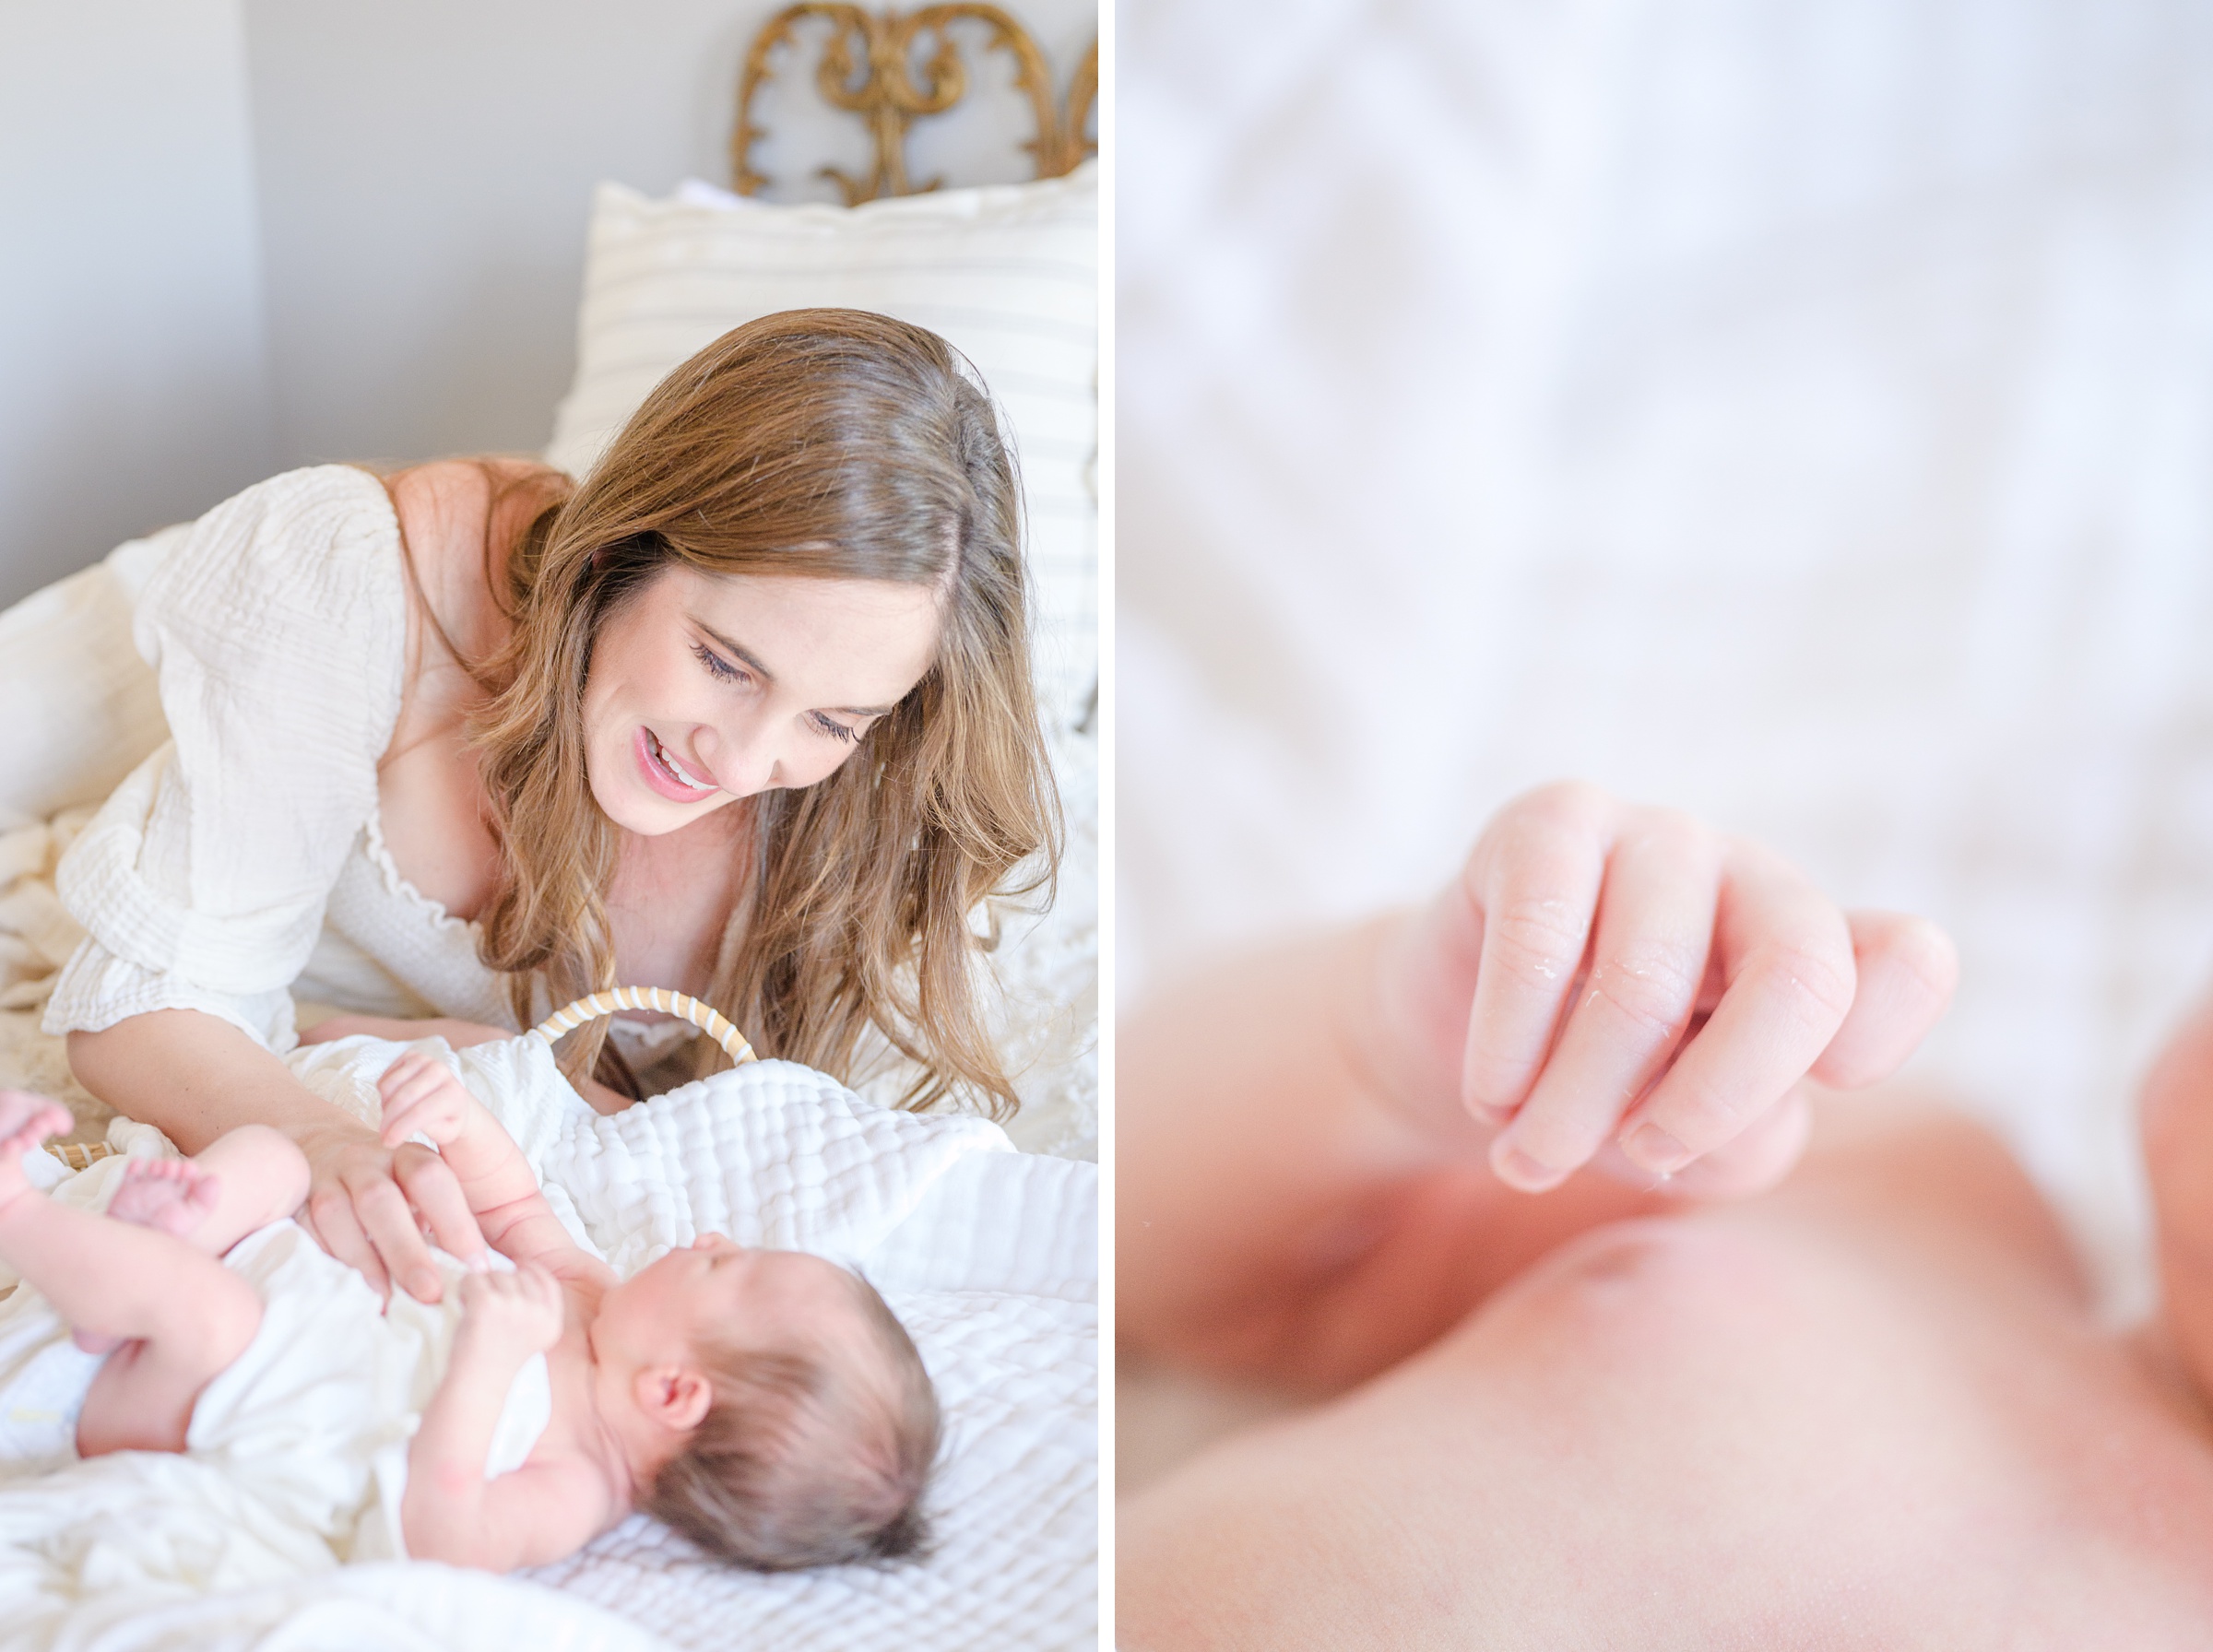 Newborn photos at an in-home lifestyle newborn session in Baltimore, Maryland photographed by Baltimore Maternity Photographer Cait Kramer.